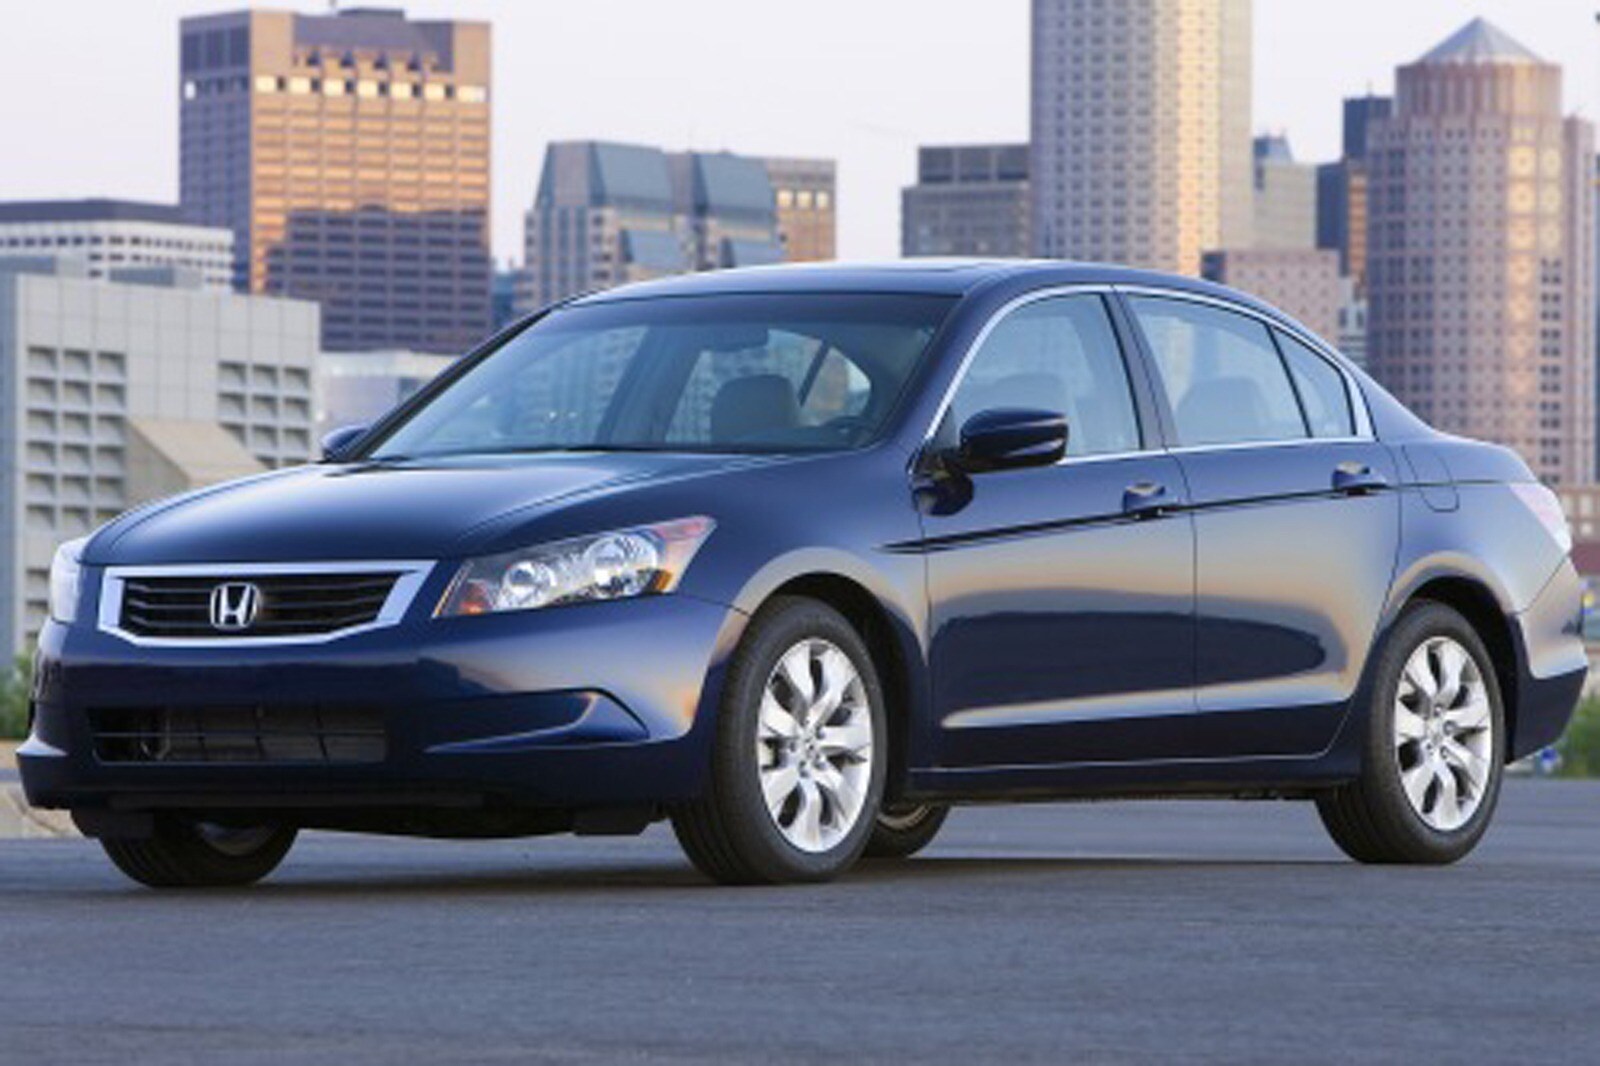 Feds Investigate 2008 Honda Accord for Inadvertent Side Airbag